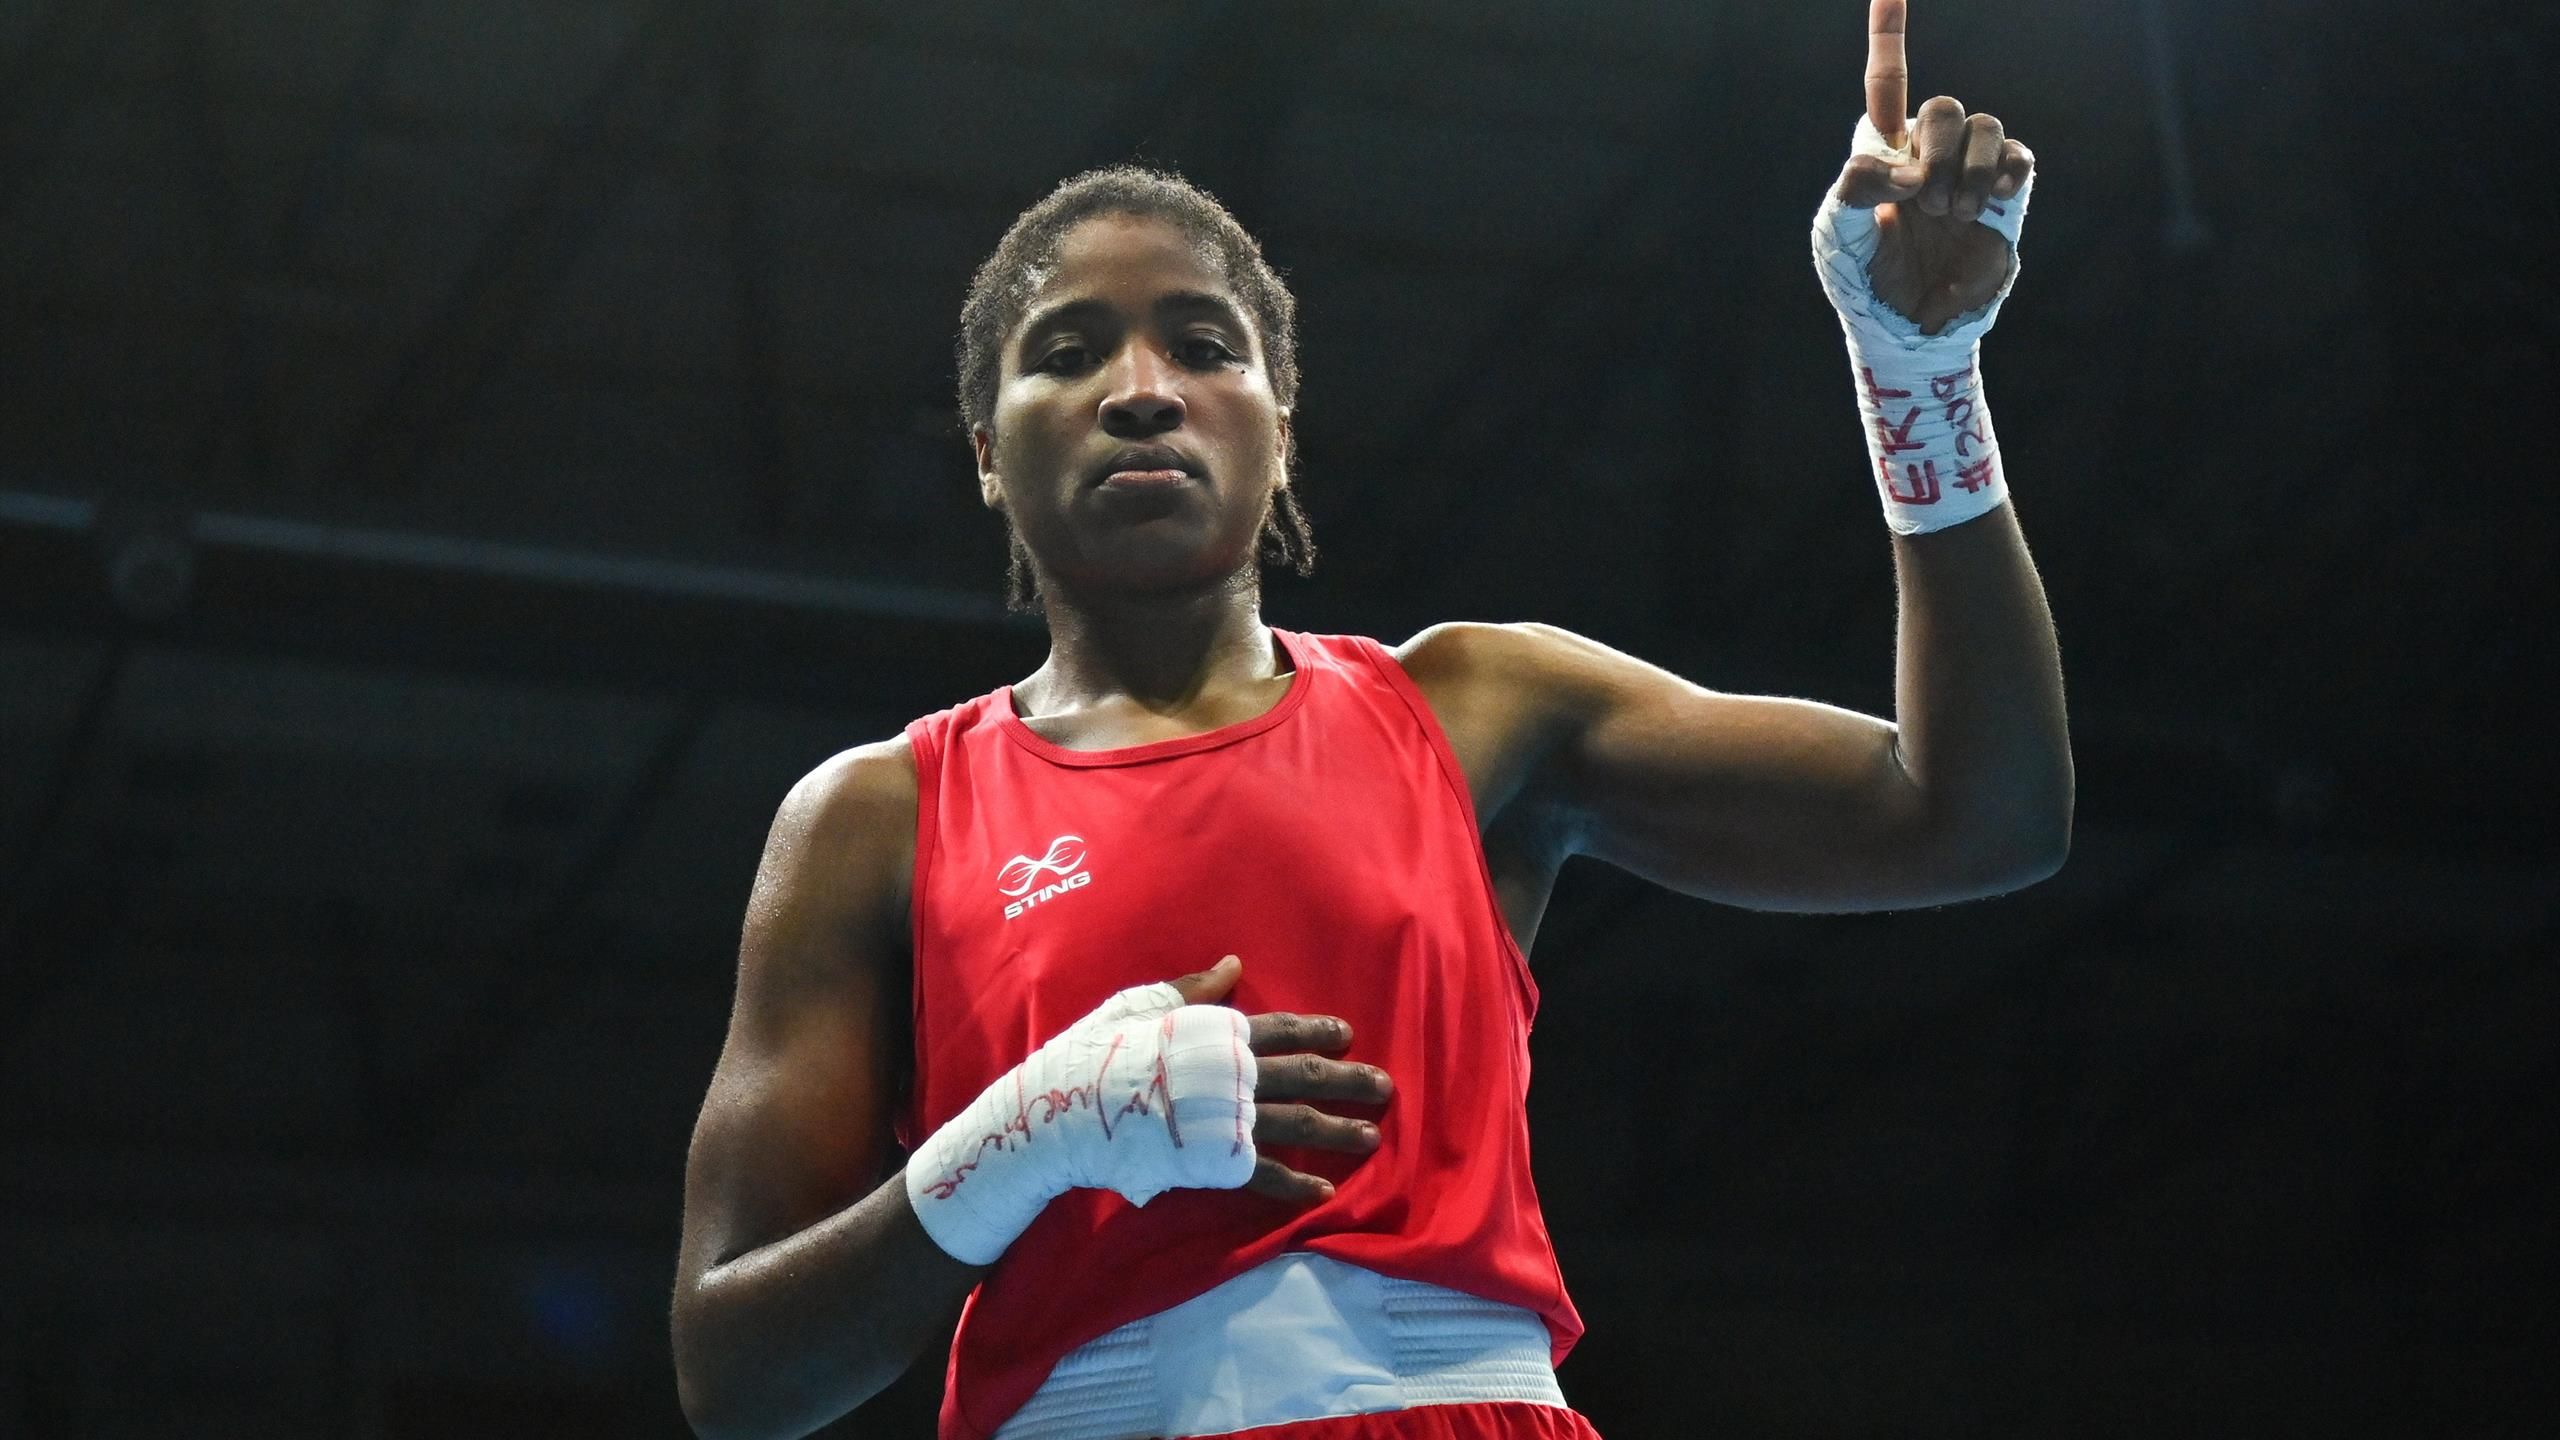 Paris 2024 Cindy Ngamba makes history by first Boxing Refugee